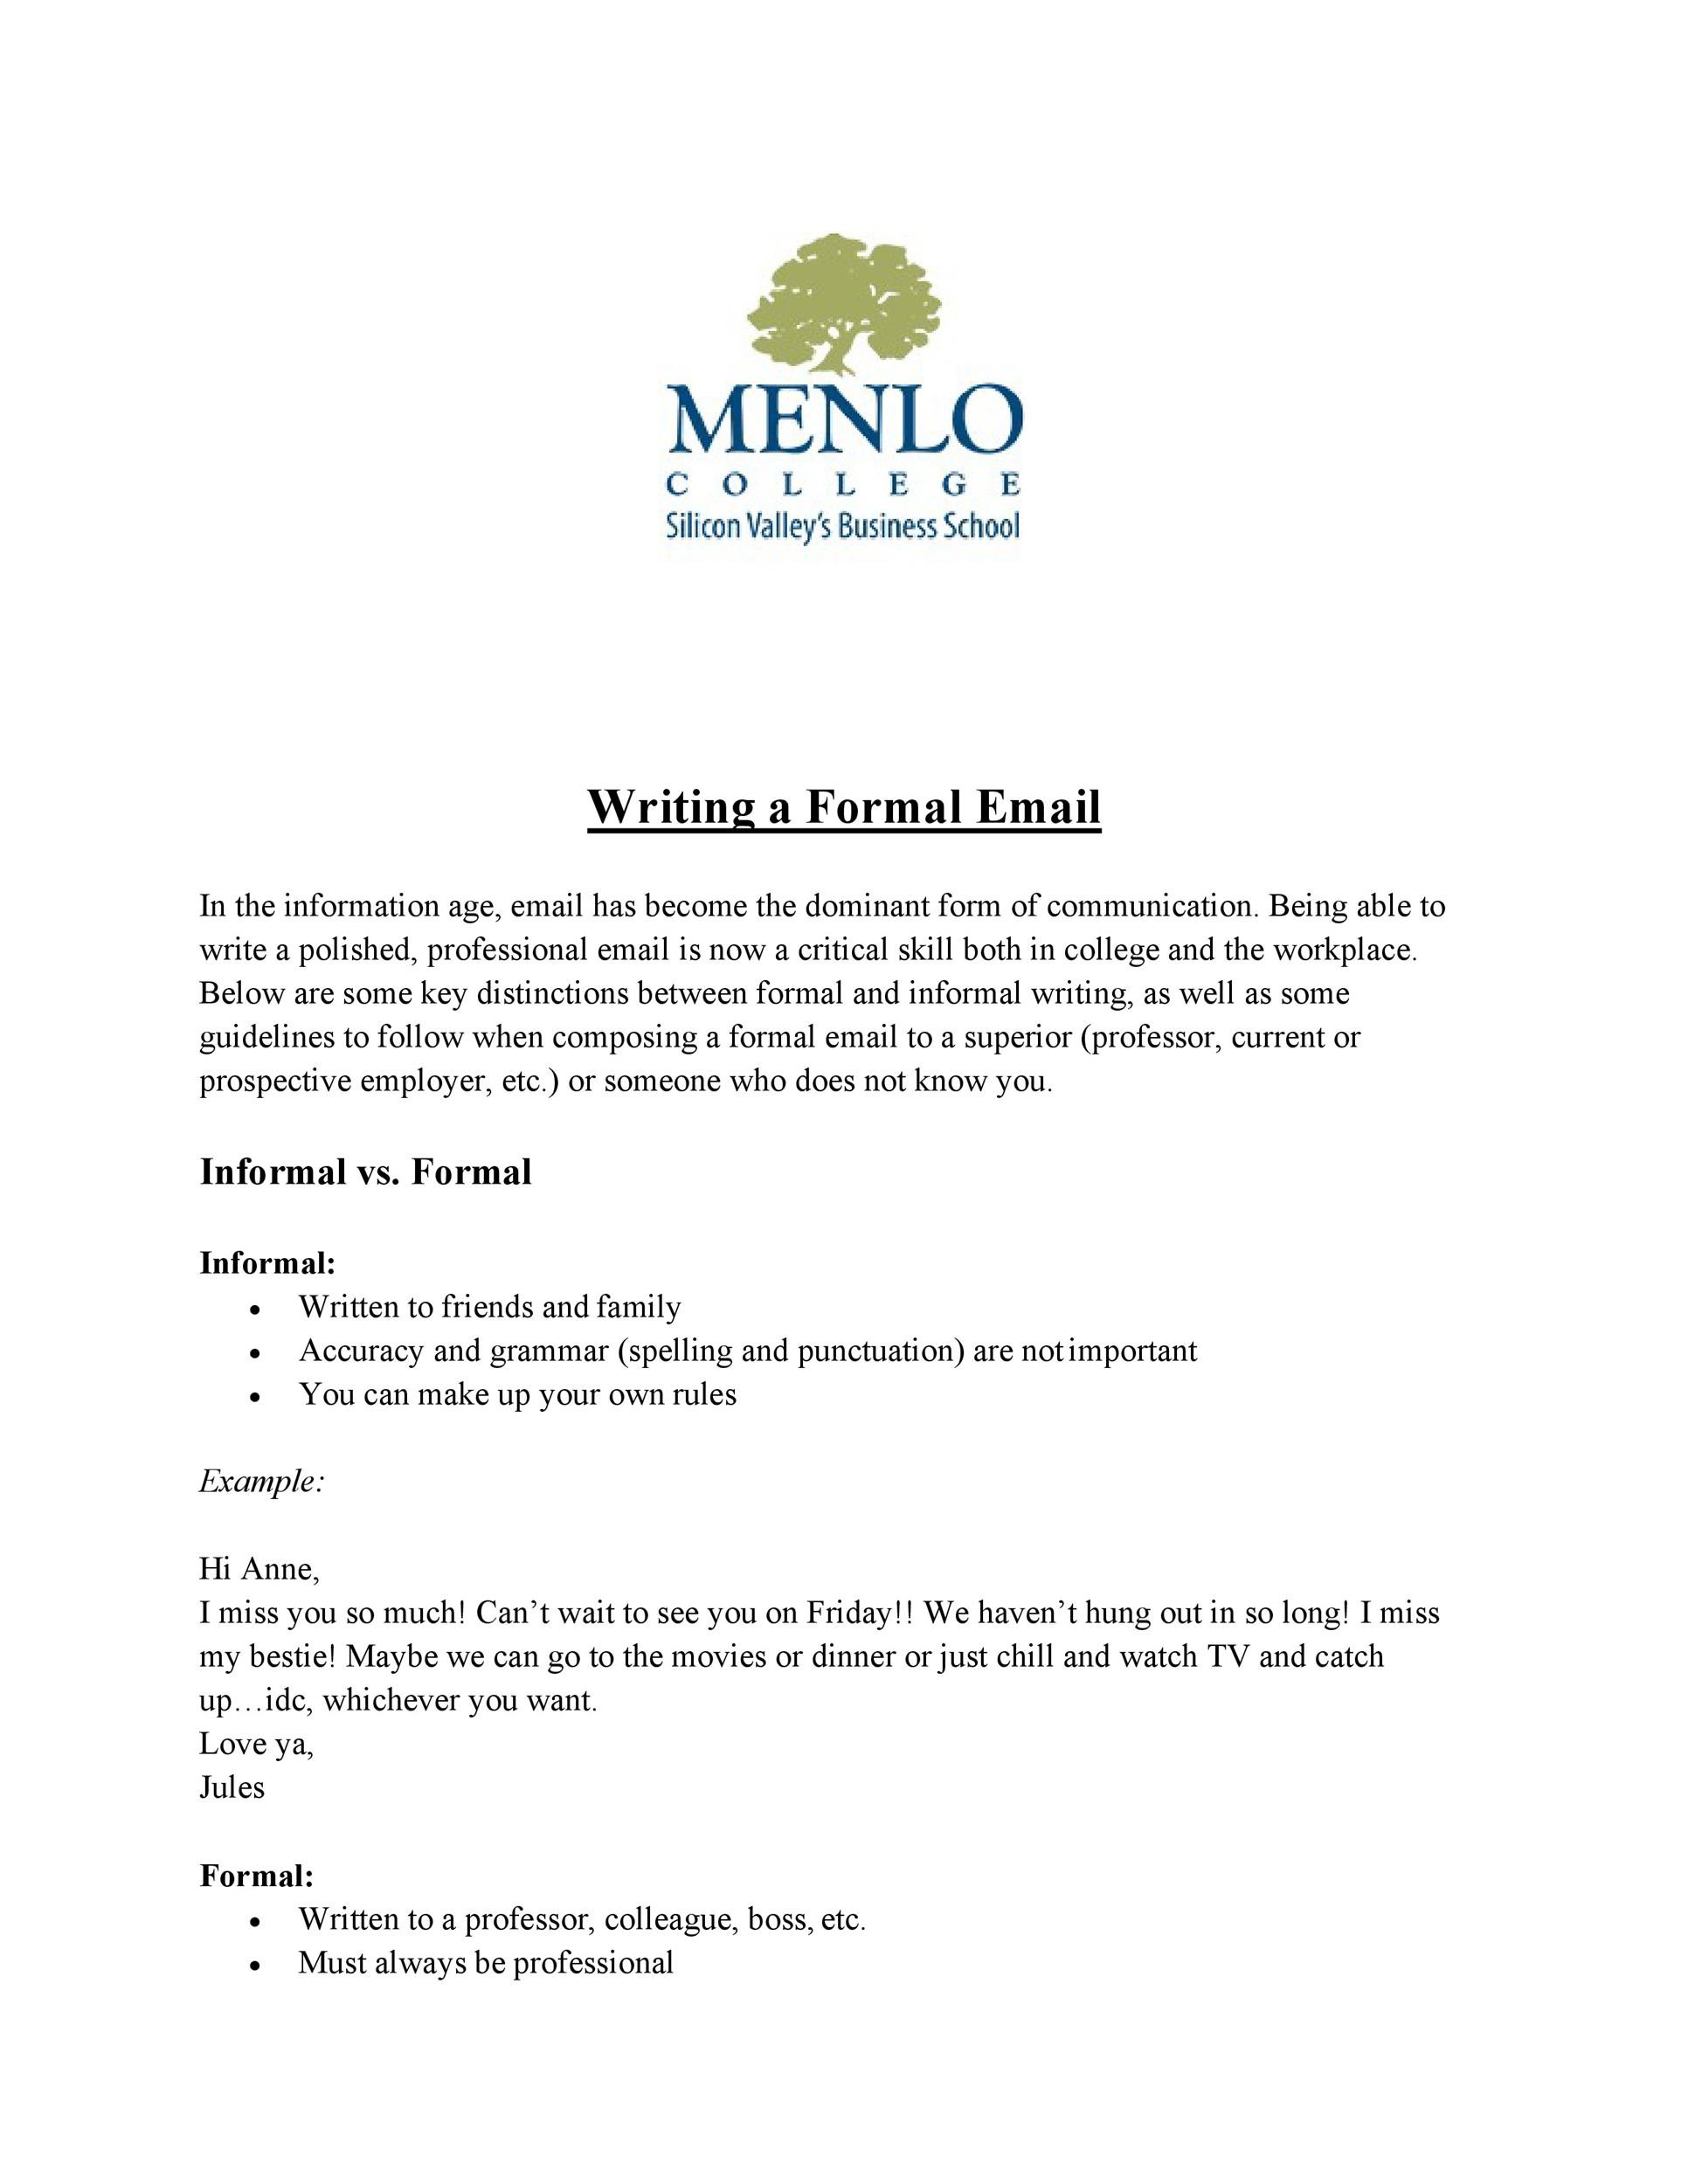 Free professional email example 02